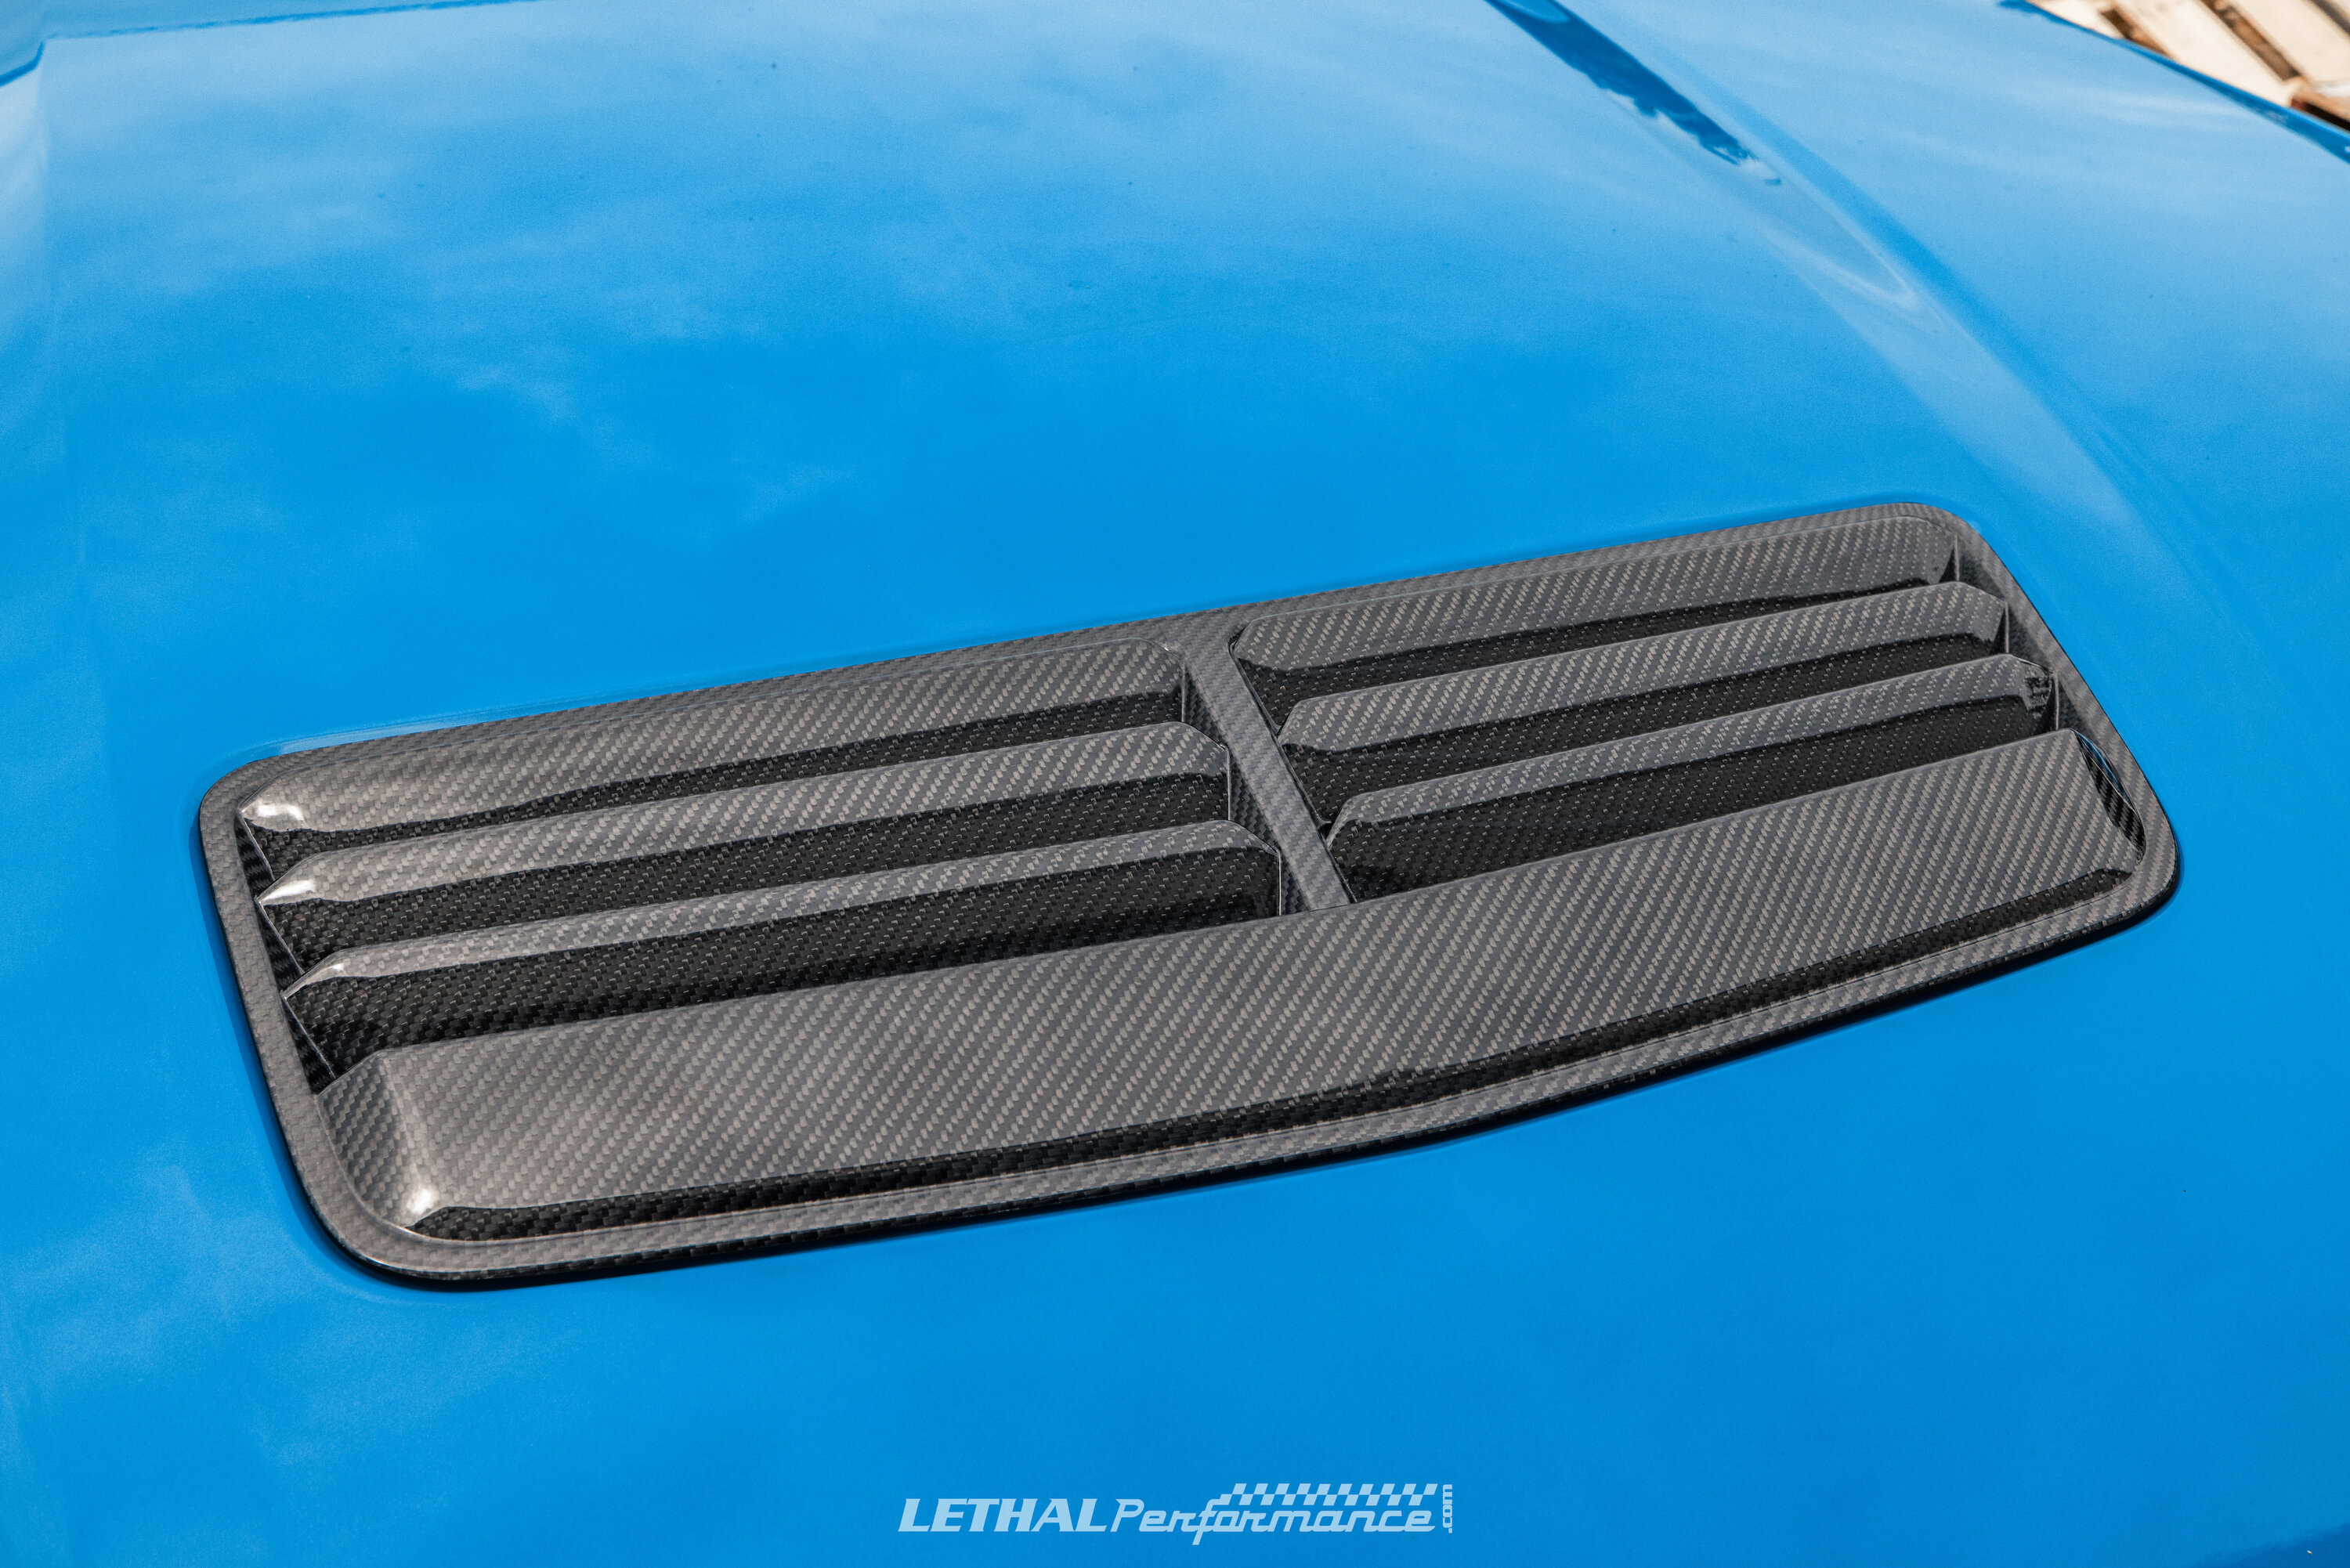 S650 Mustang Lethal Performance 2024 Mustang Carbon Fiber Products! PRE-ORDER NOW! lp2024carbon2